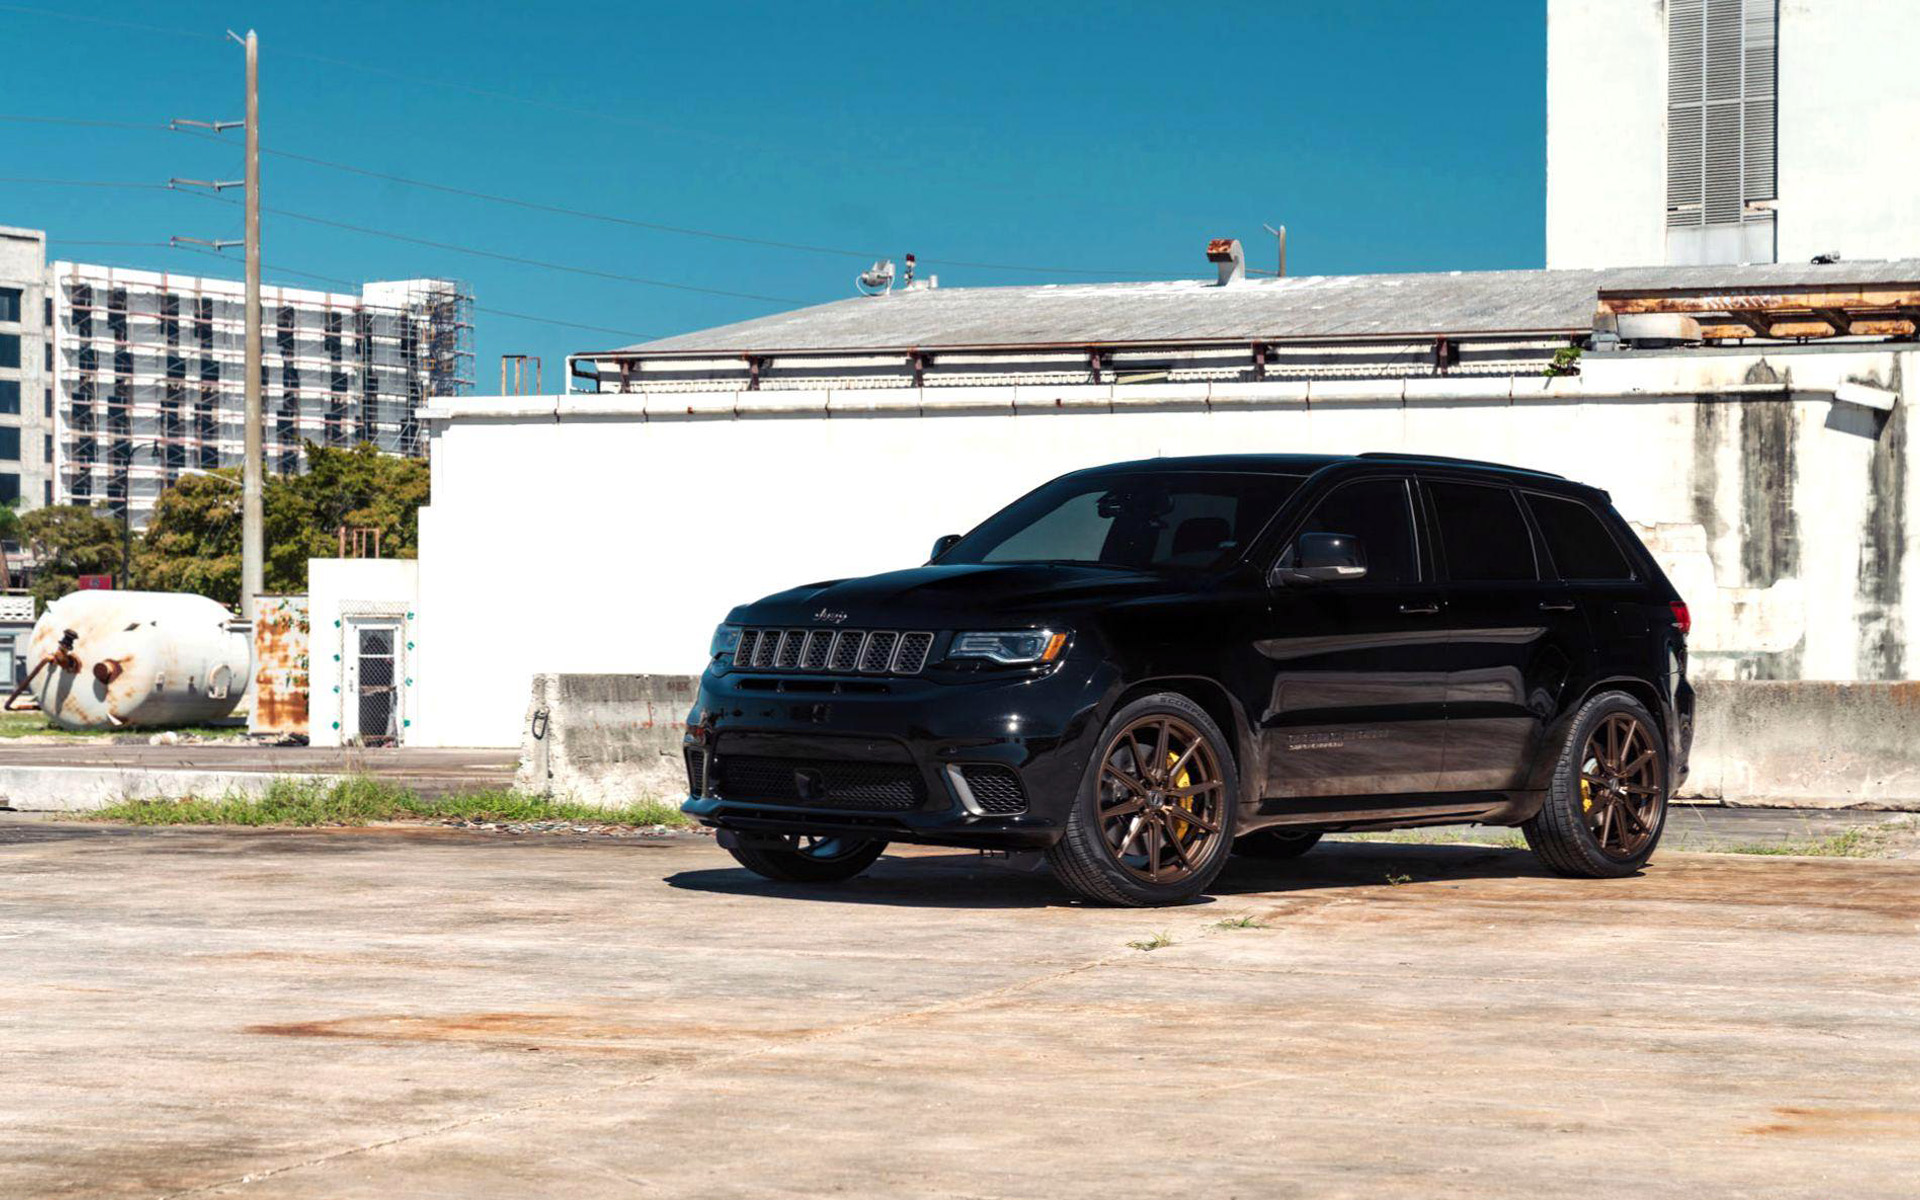 Download wallpaper Jeep Grand Cherokee Trackhawk, tuning, 2019 cars, Vossen Wheels, HF- SUVs, 2019 Jeep Grand Cherokee, american cars, Jeep for desktop with resolution 1920x1200. High Quality HD picture wallpaper